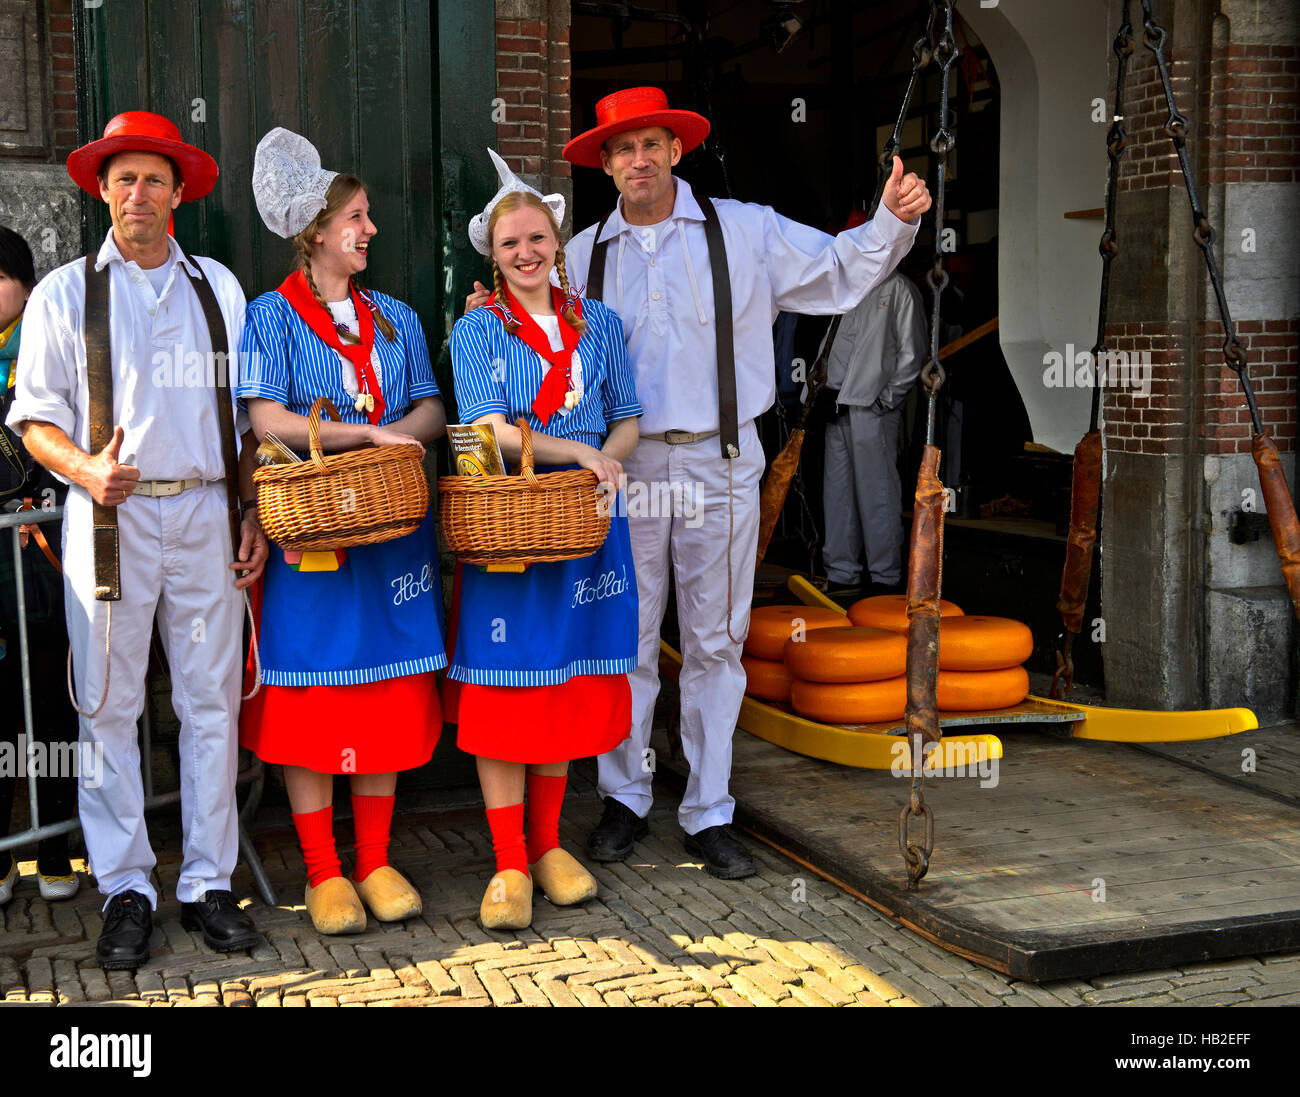 Dutch cheese girls, Kaasmeisje, traditional costume, cheese carriers, cheese market, Alkmaar, Holland, The Netherlands Stock Photo